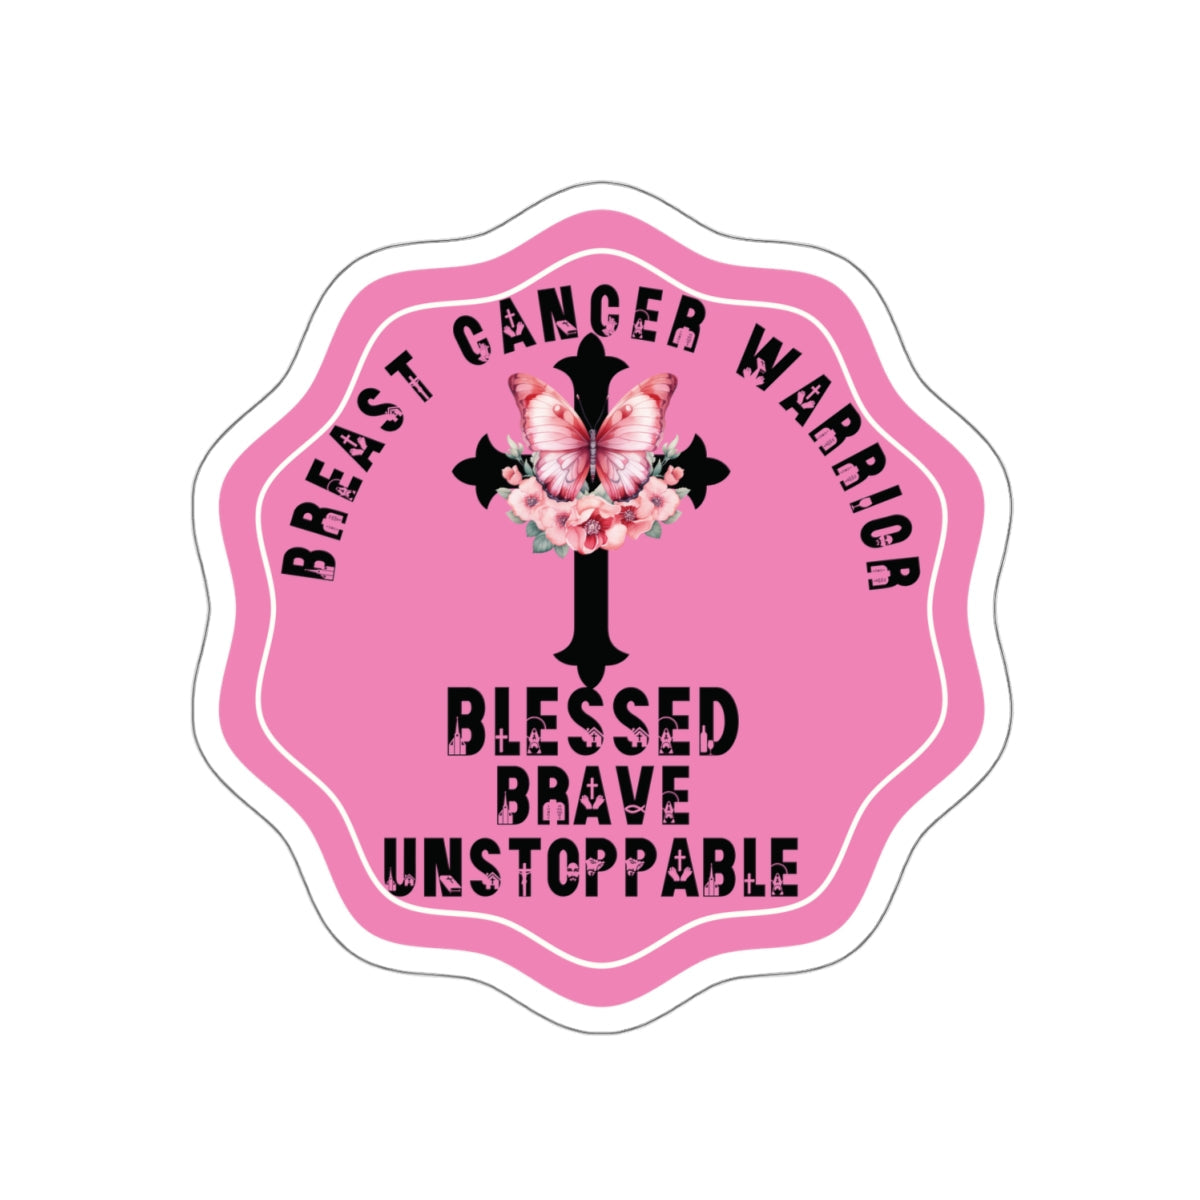 Blessed Breast Cancer Warrior Motivational Quote Kiss-Cut Stickers-Paper products-4" × 4"-White-mysticalcherry